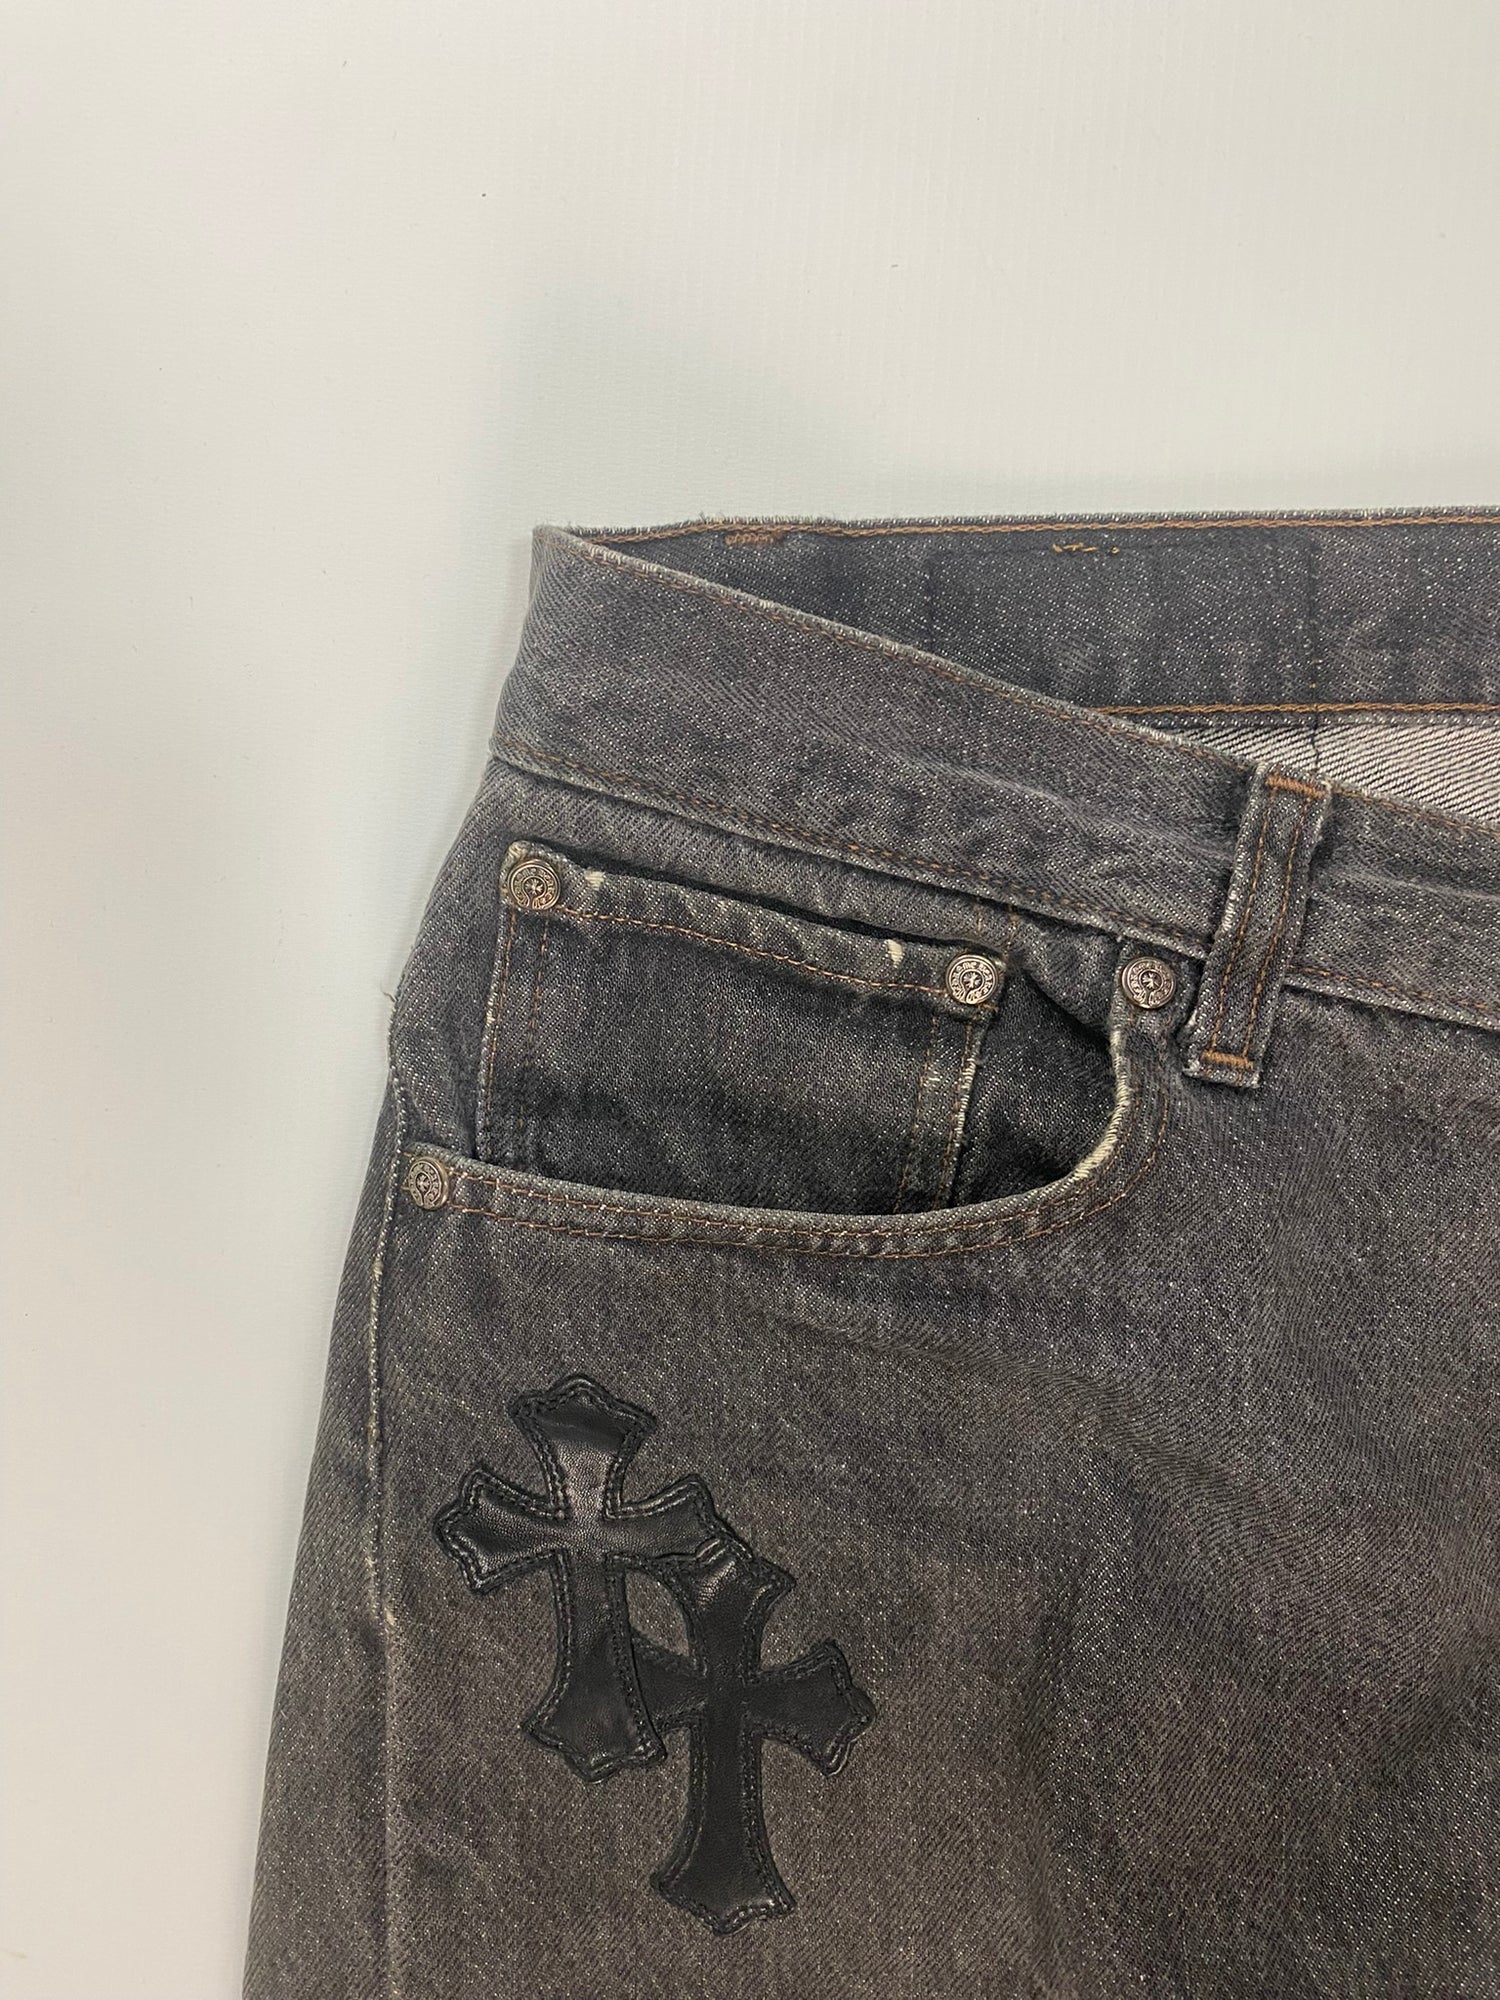 Chrome Hearts Levi’s 501 cross patched jeans in washed out black / grey  SZ:W32